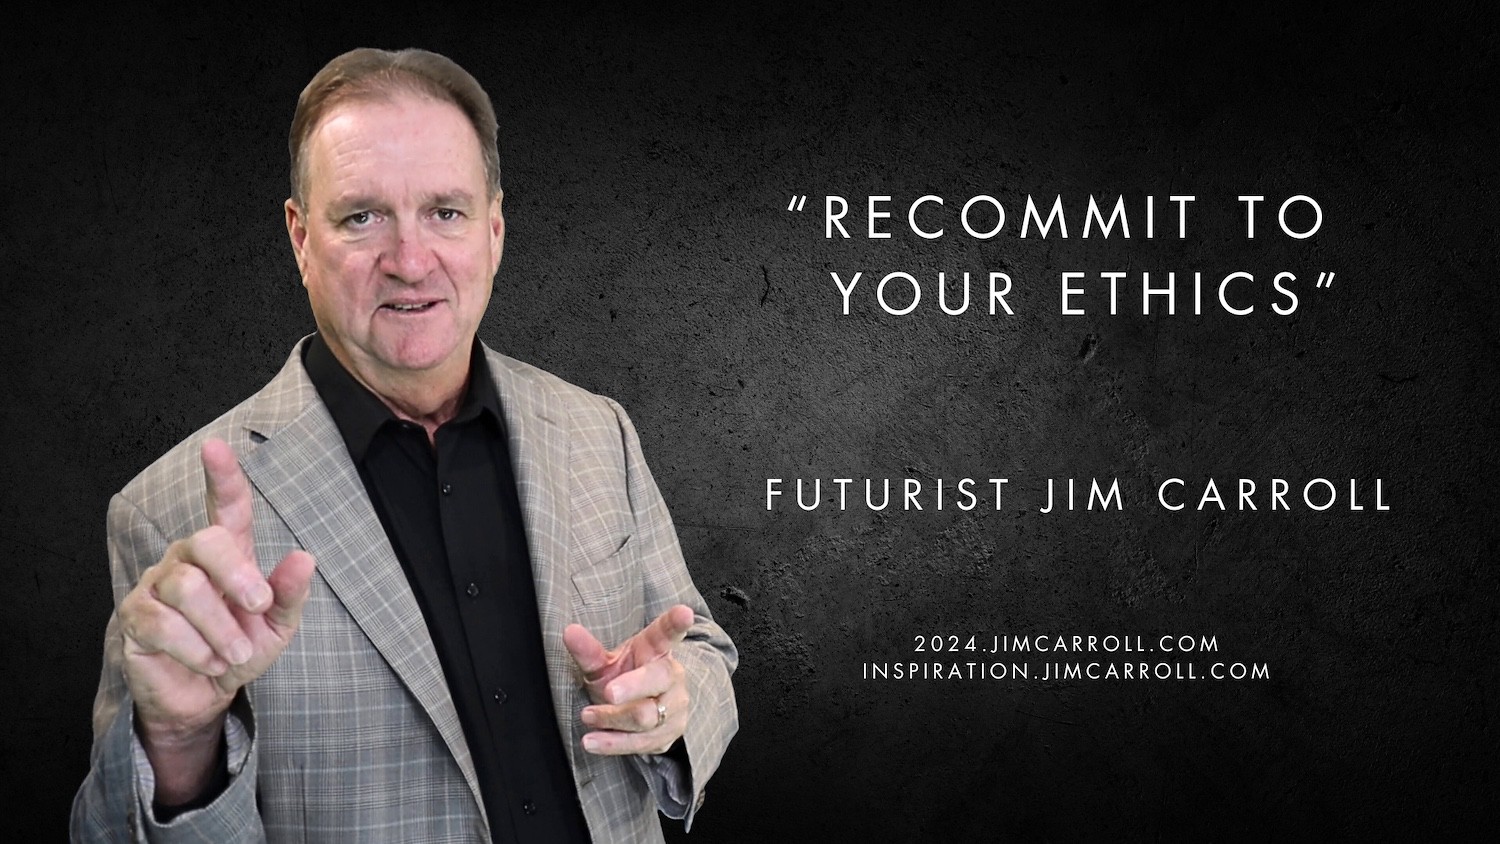 "Recommit to your ethics!" - Futurist Jim Carroll